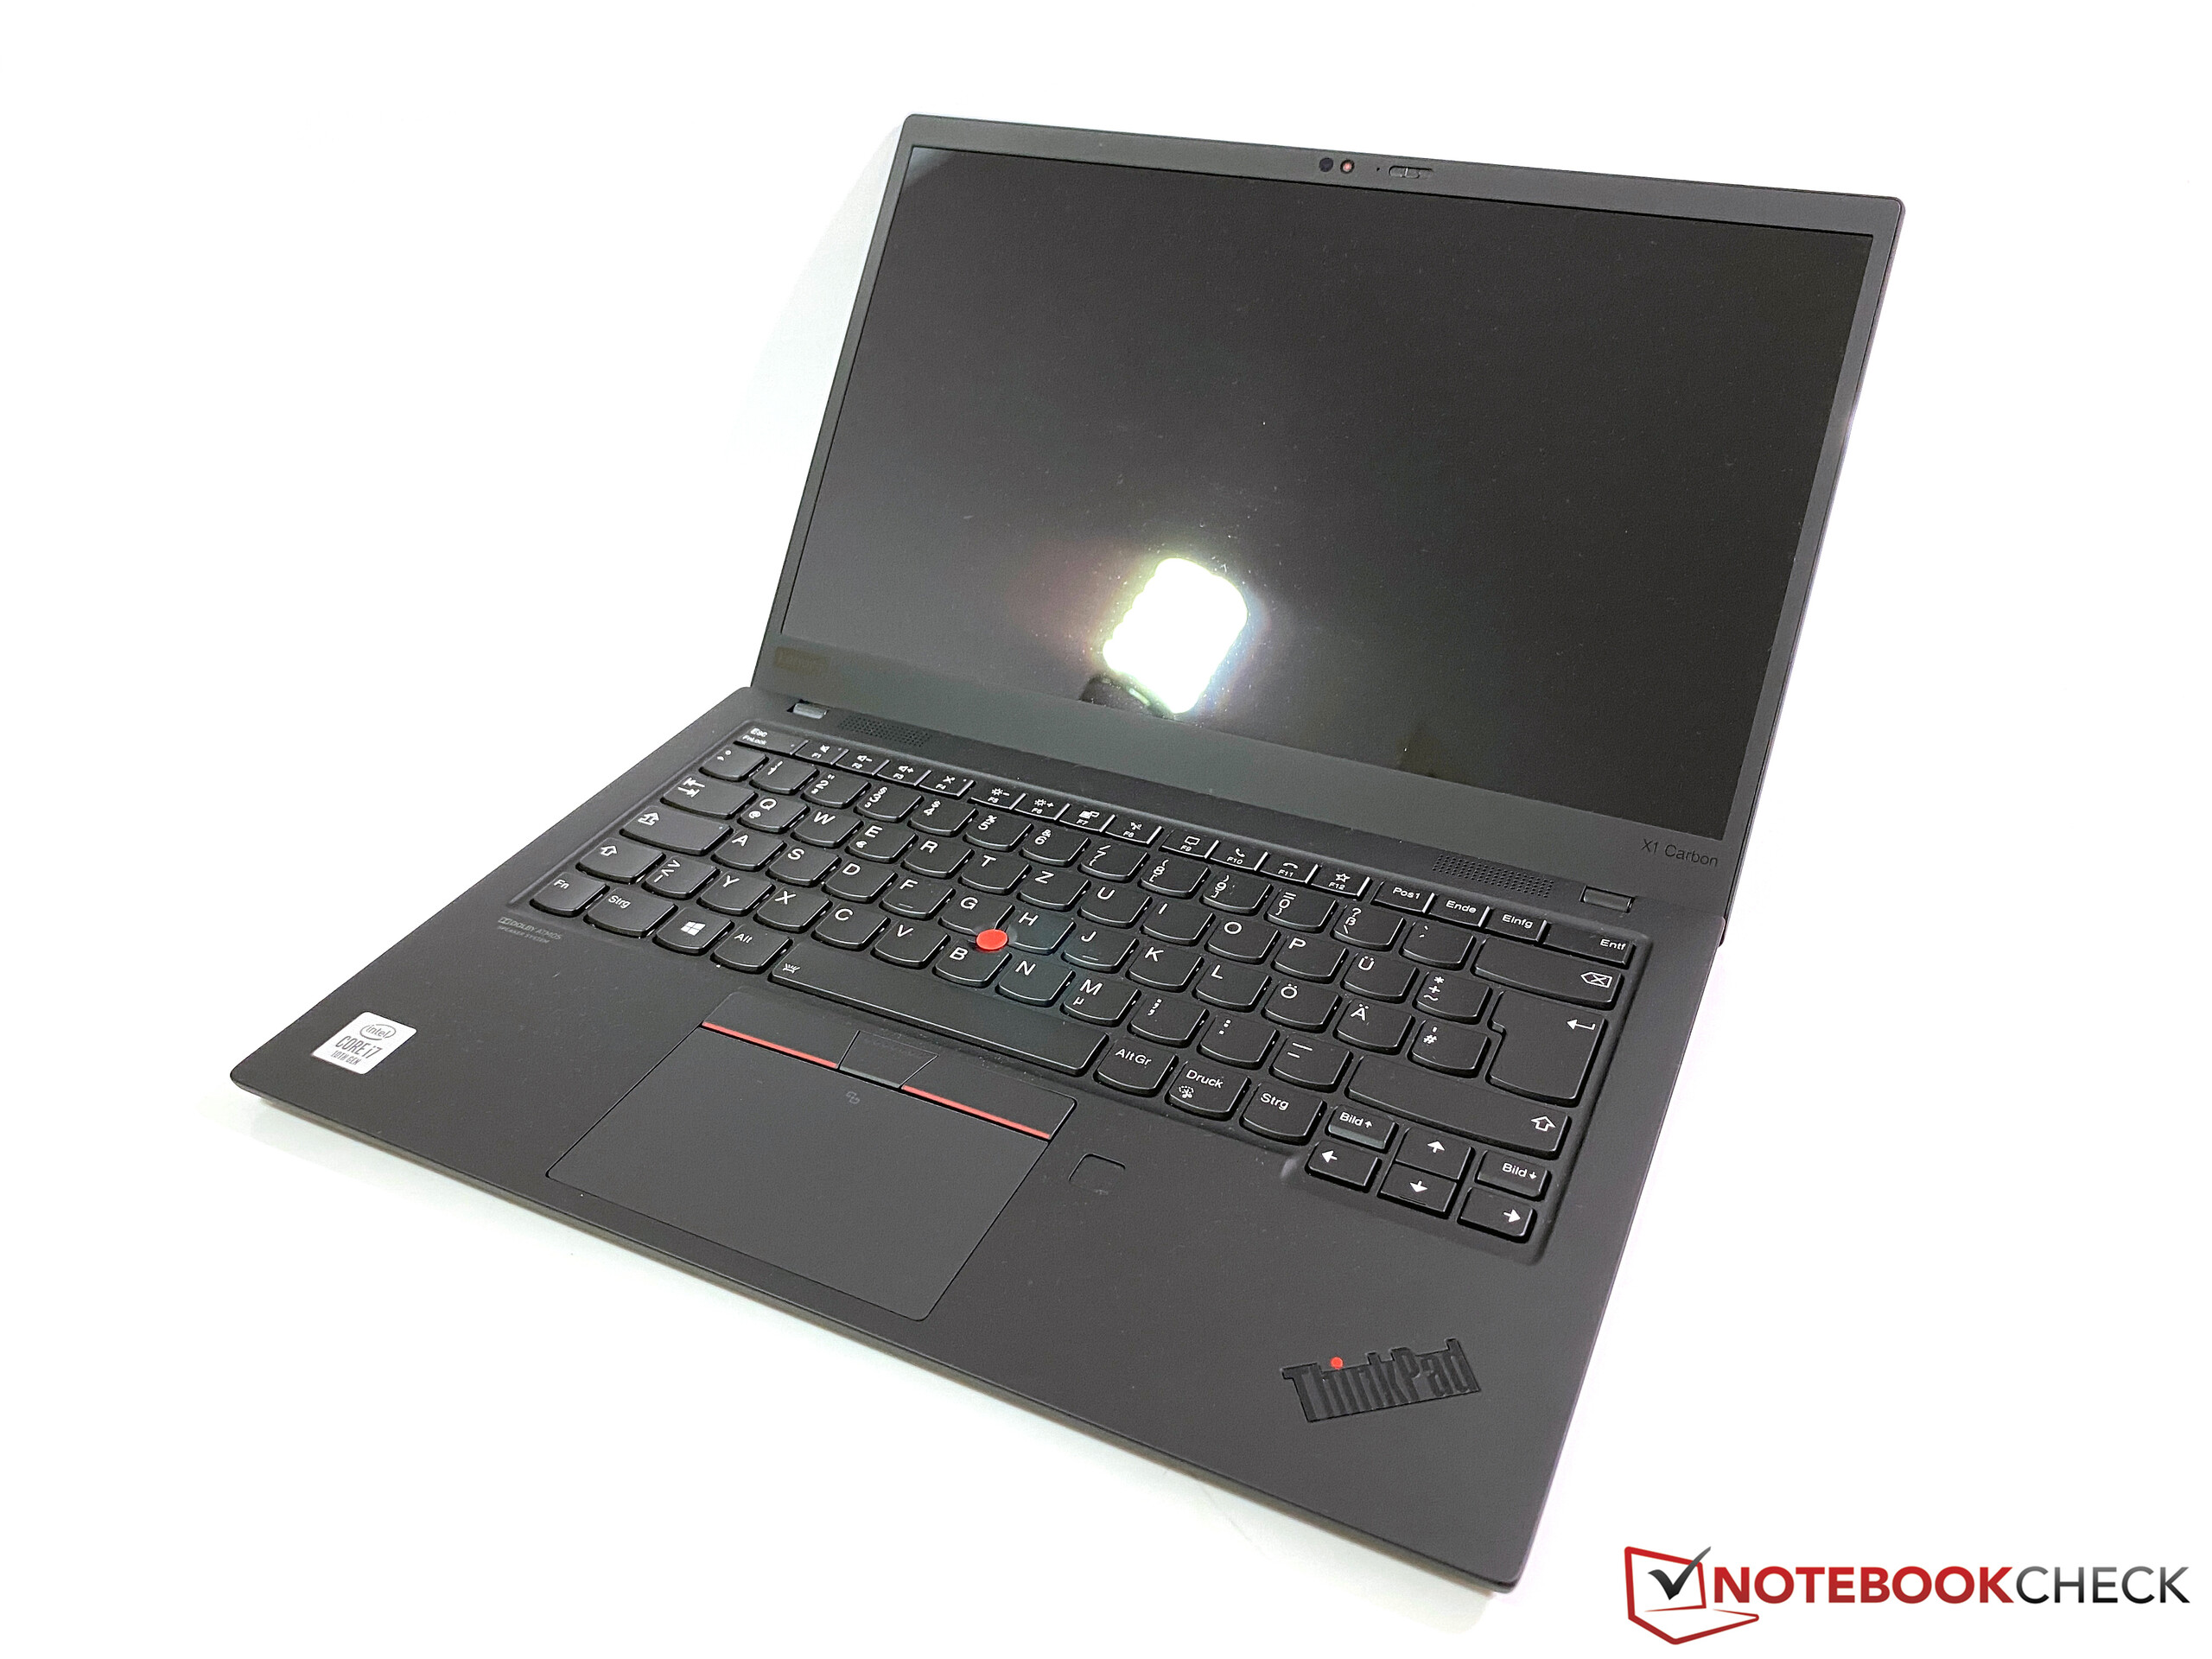 Lenovo ThinkPad X1 Carbon 2020 Business-Laptop Review: 4K display